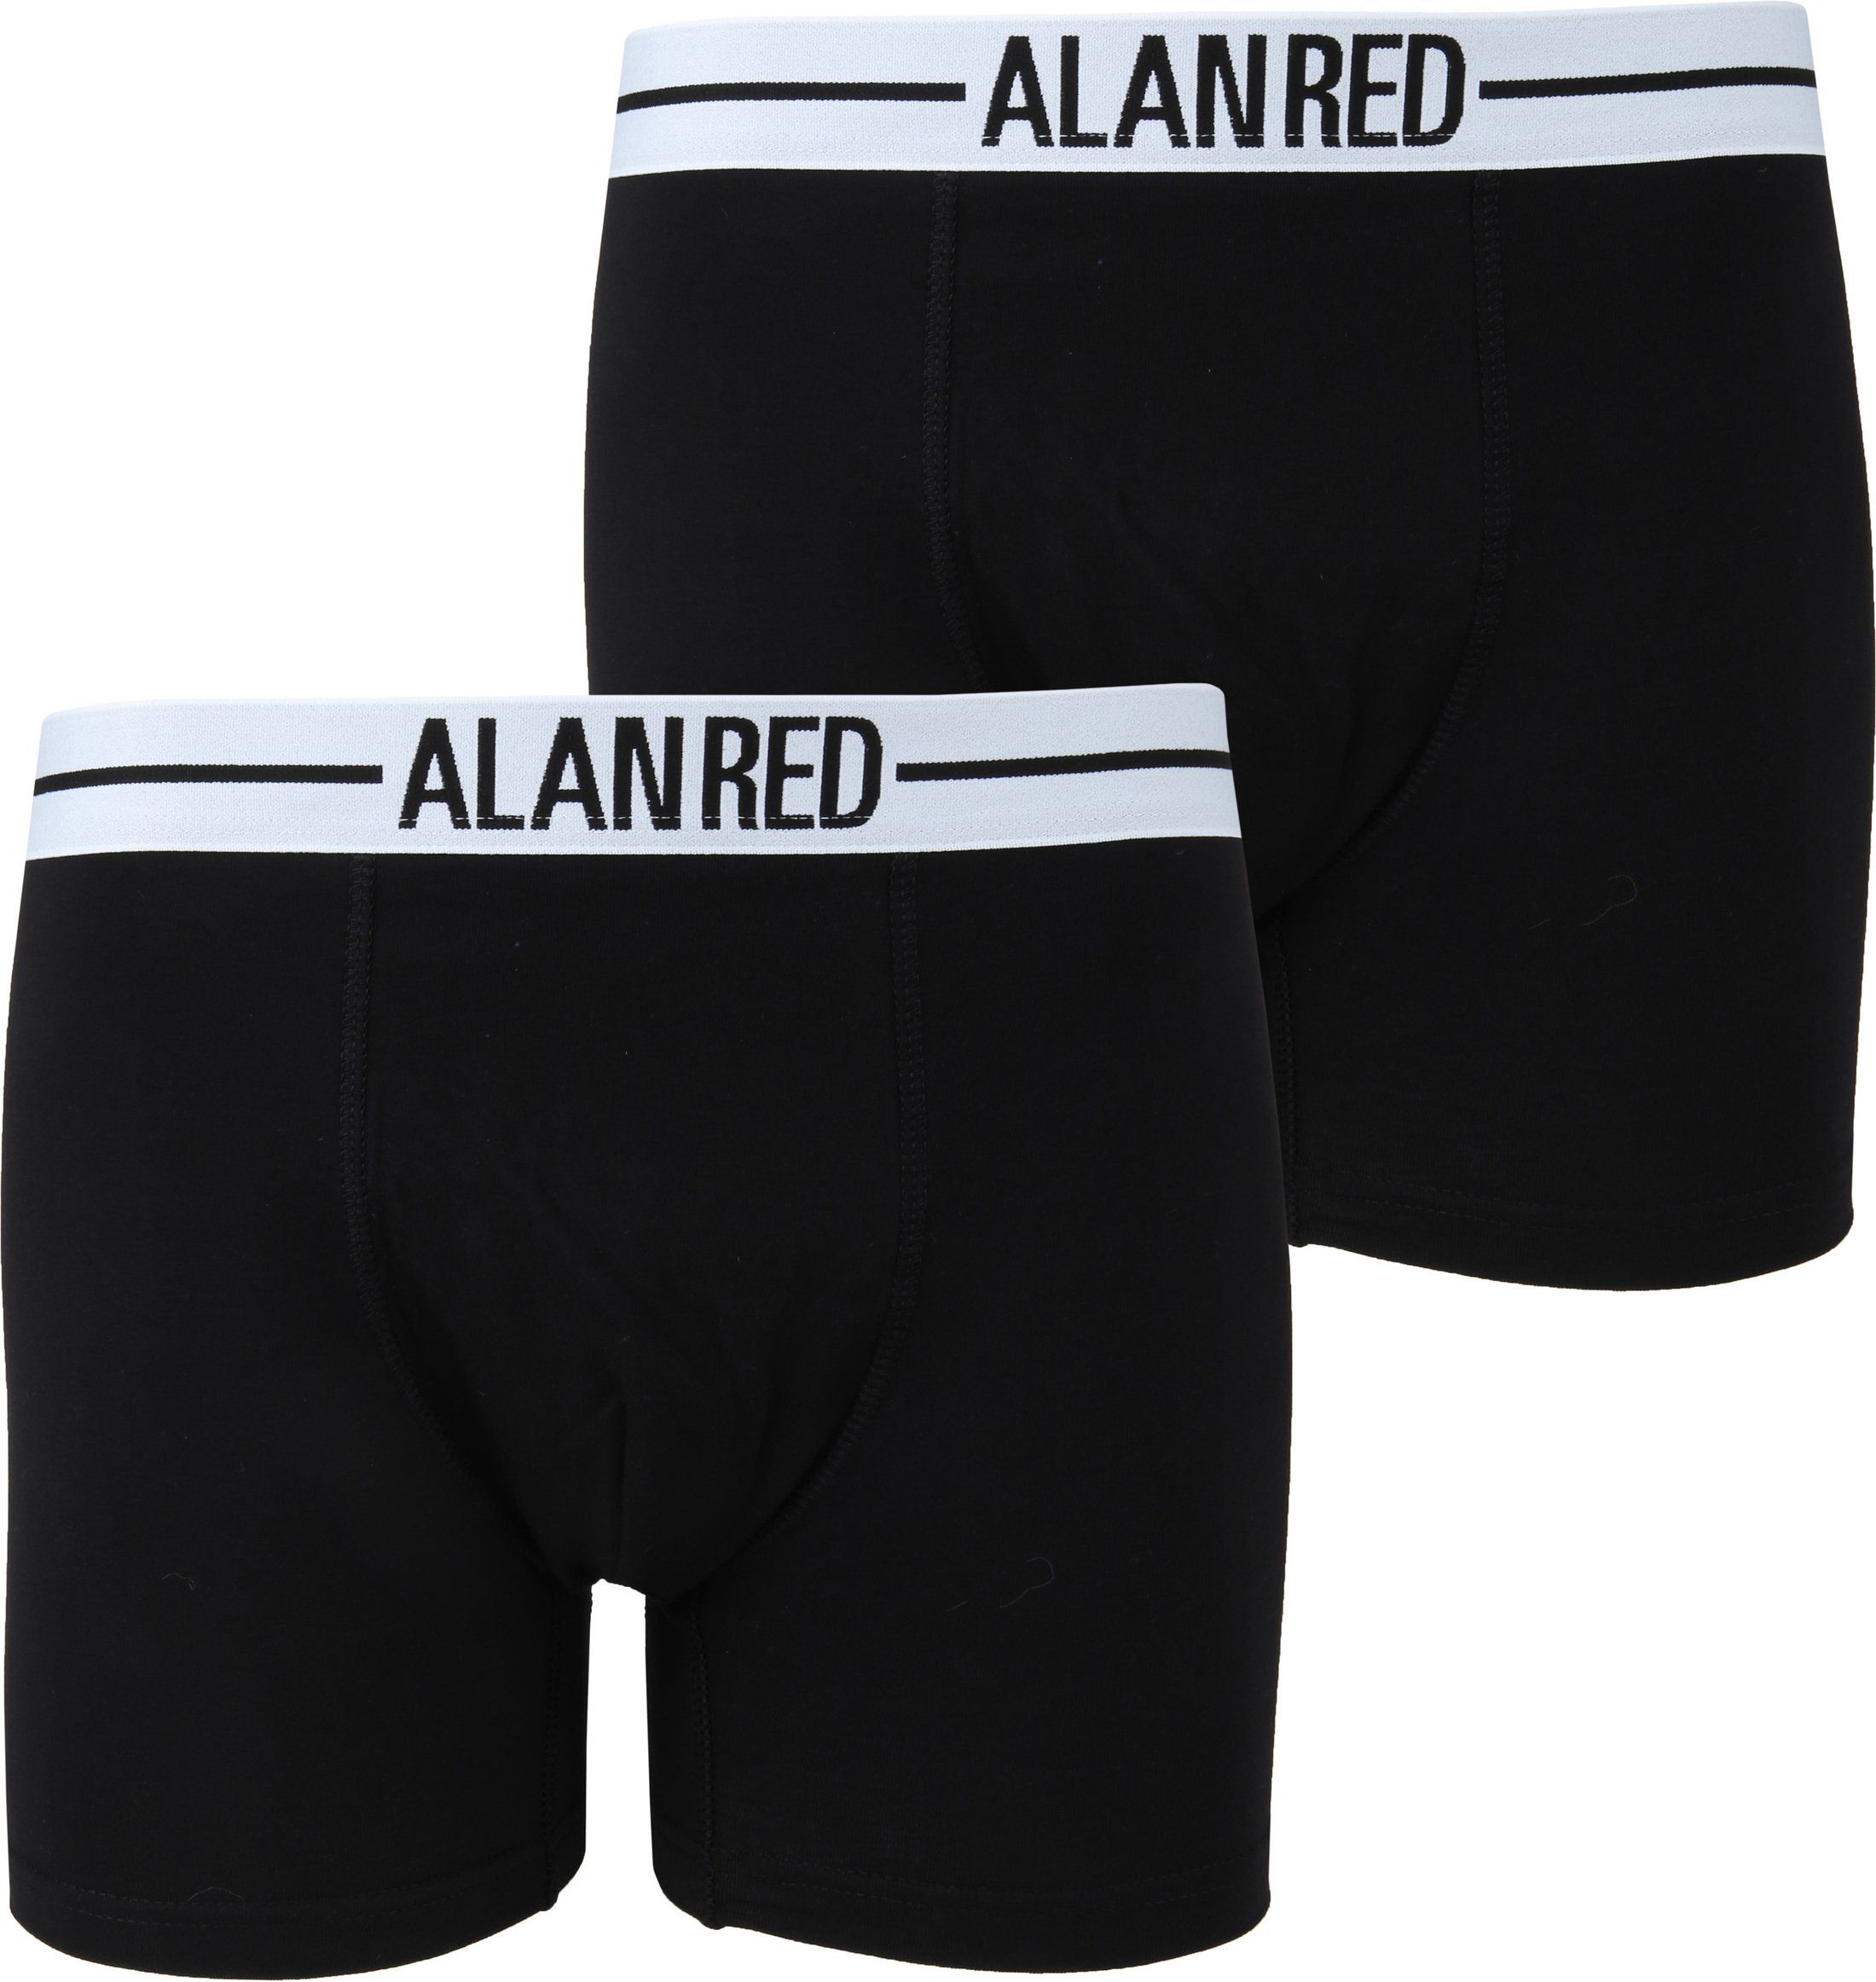 Alan Red Boxer Shorts 2-Pack Black size S